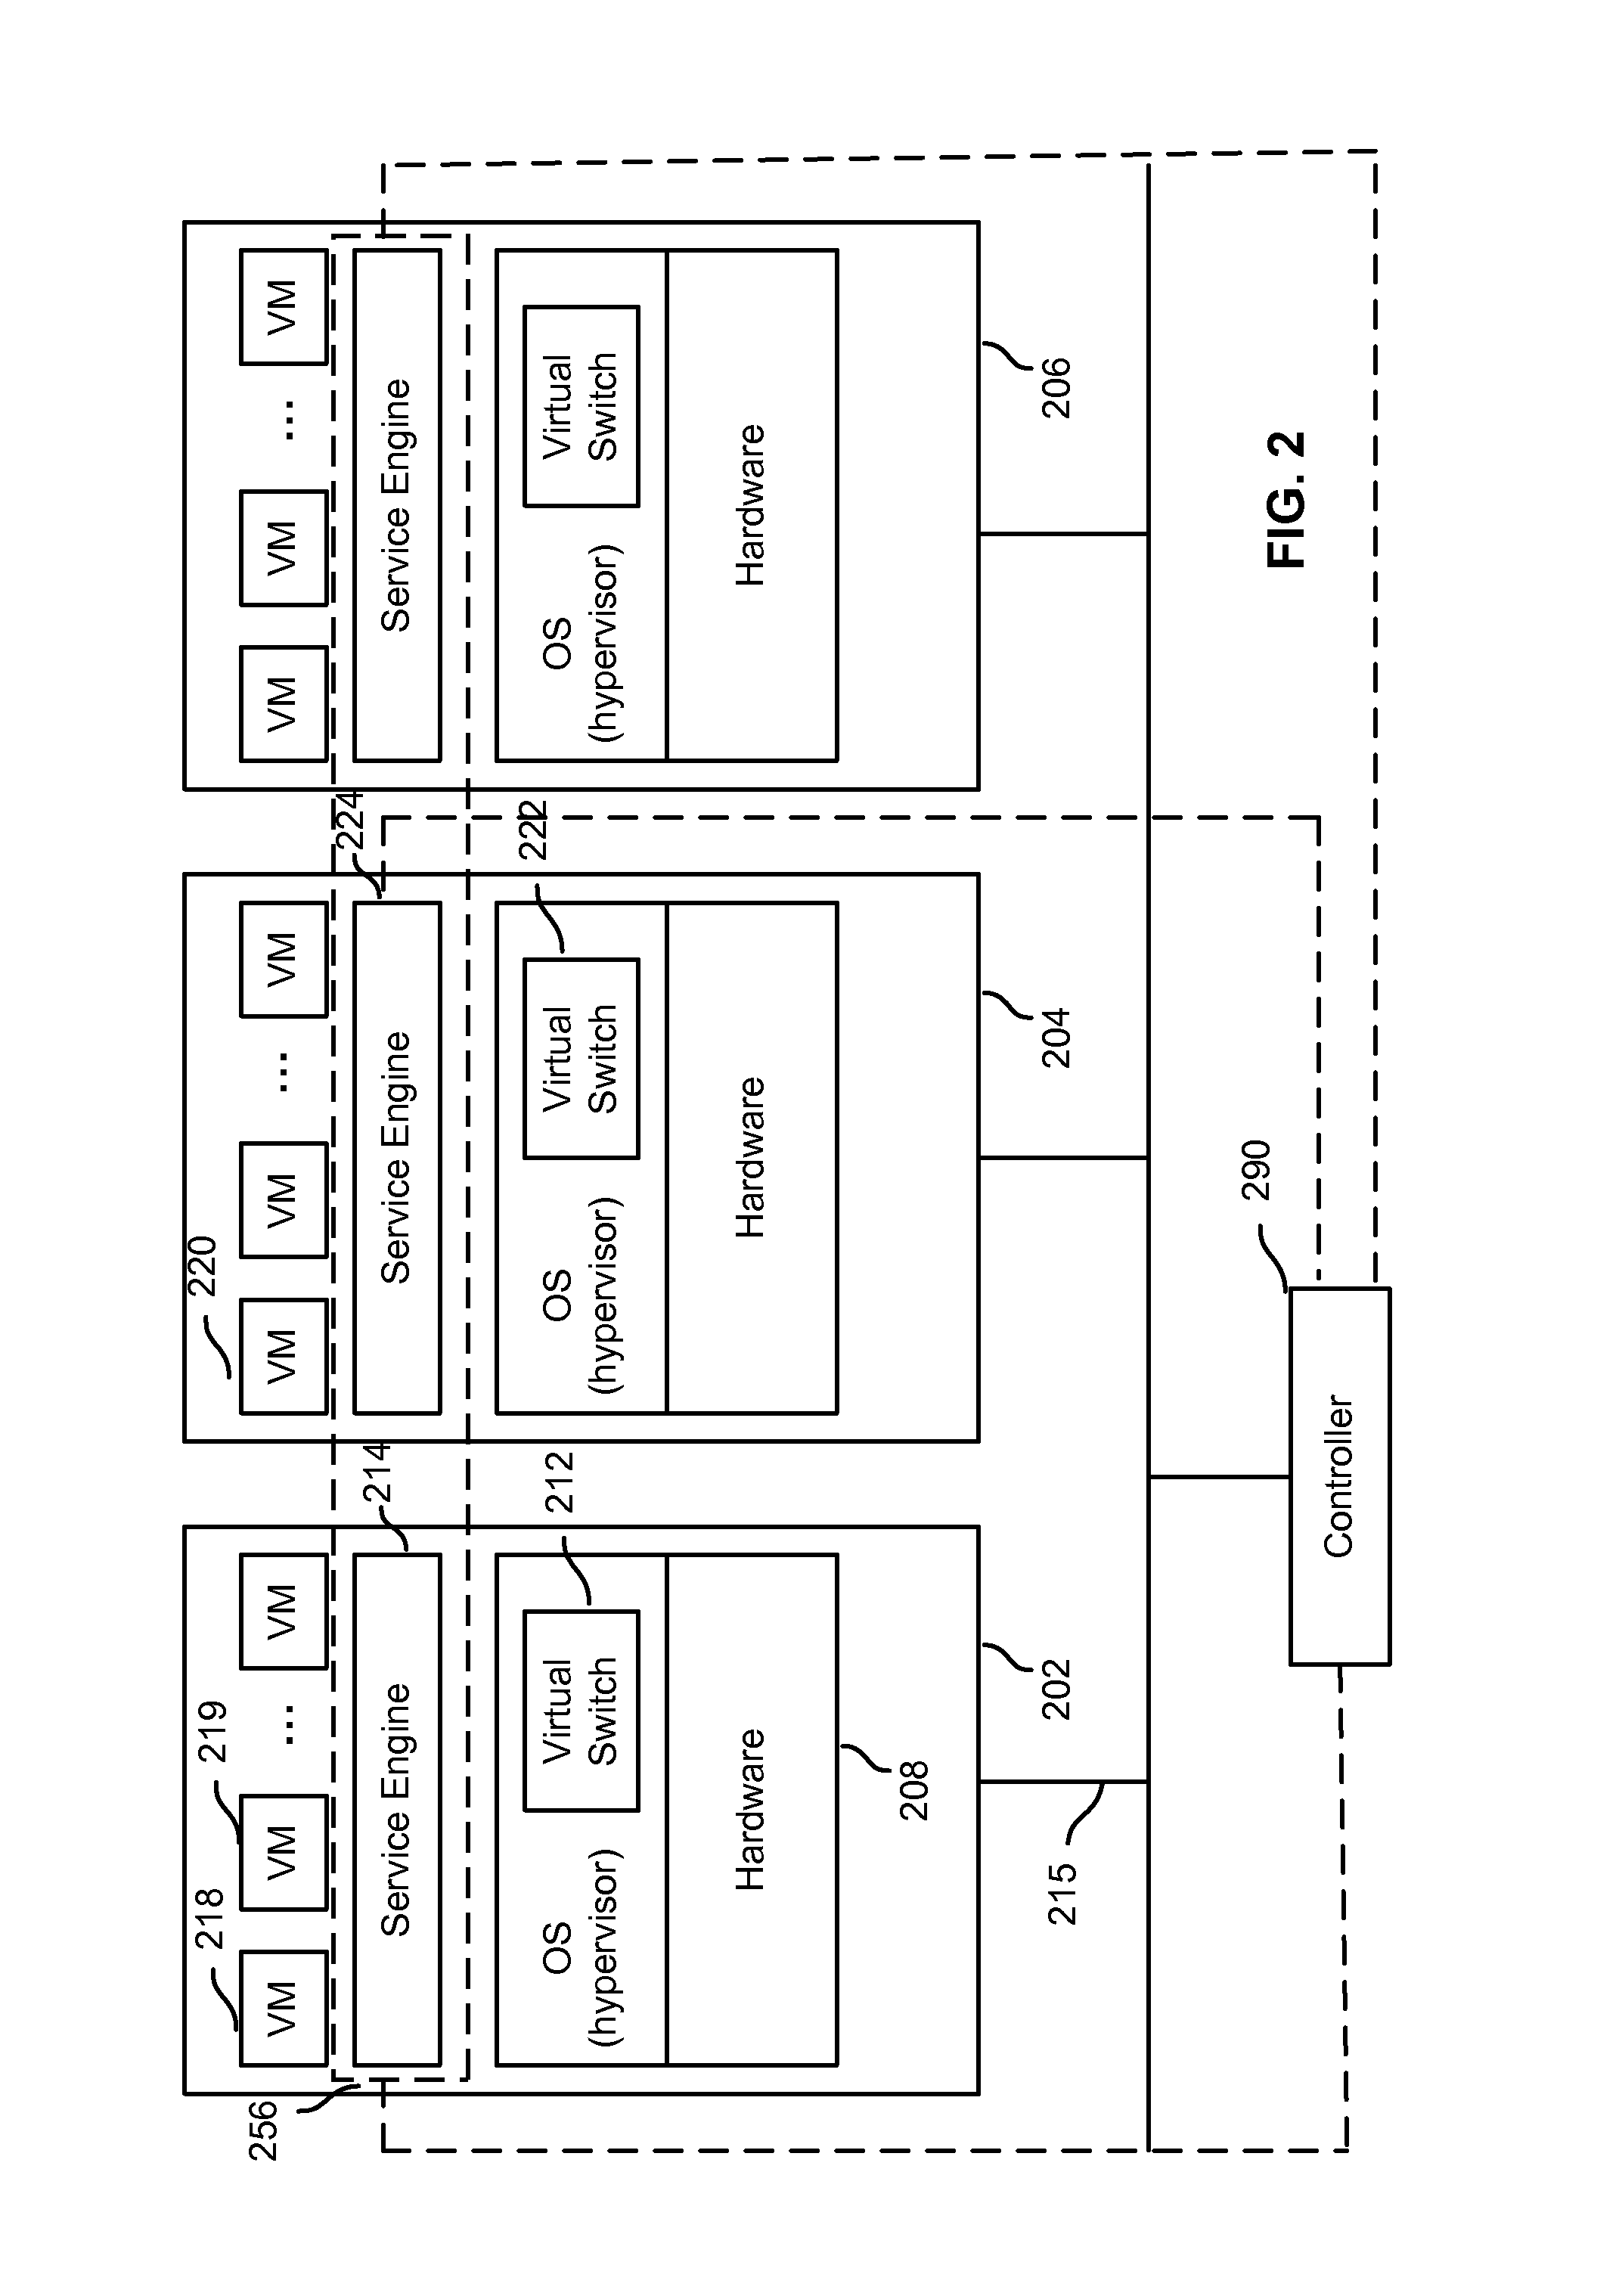 Managing and controlling a distributed network service platform